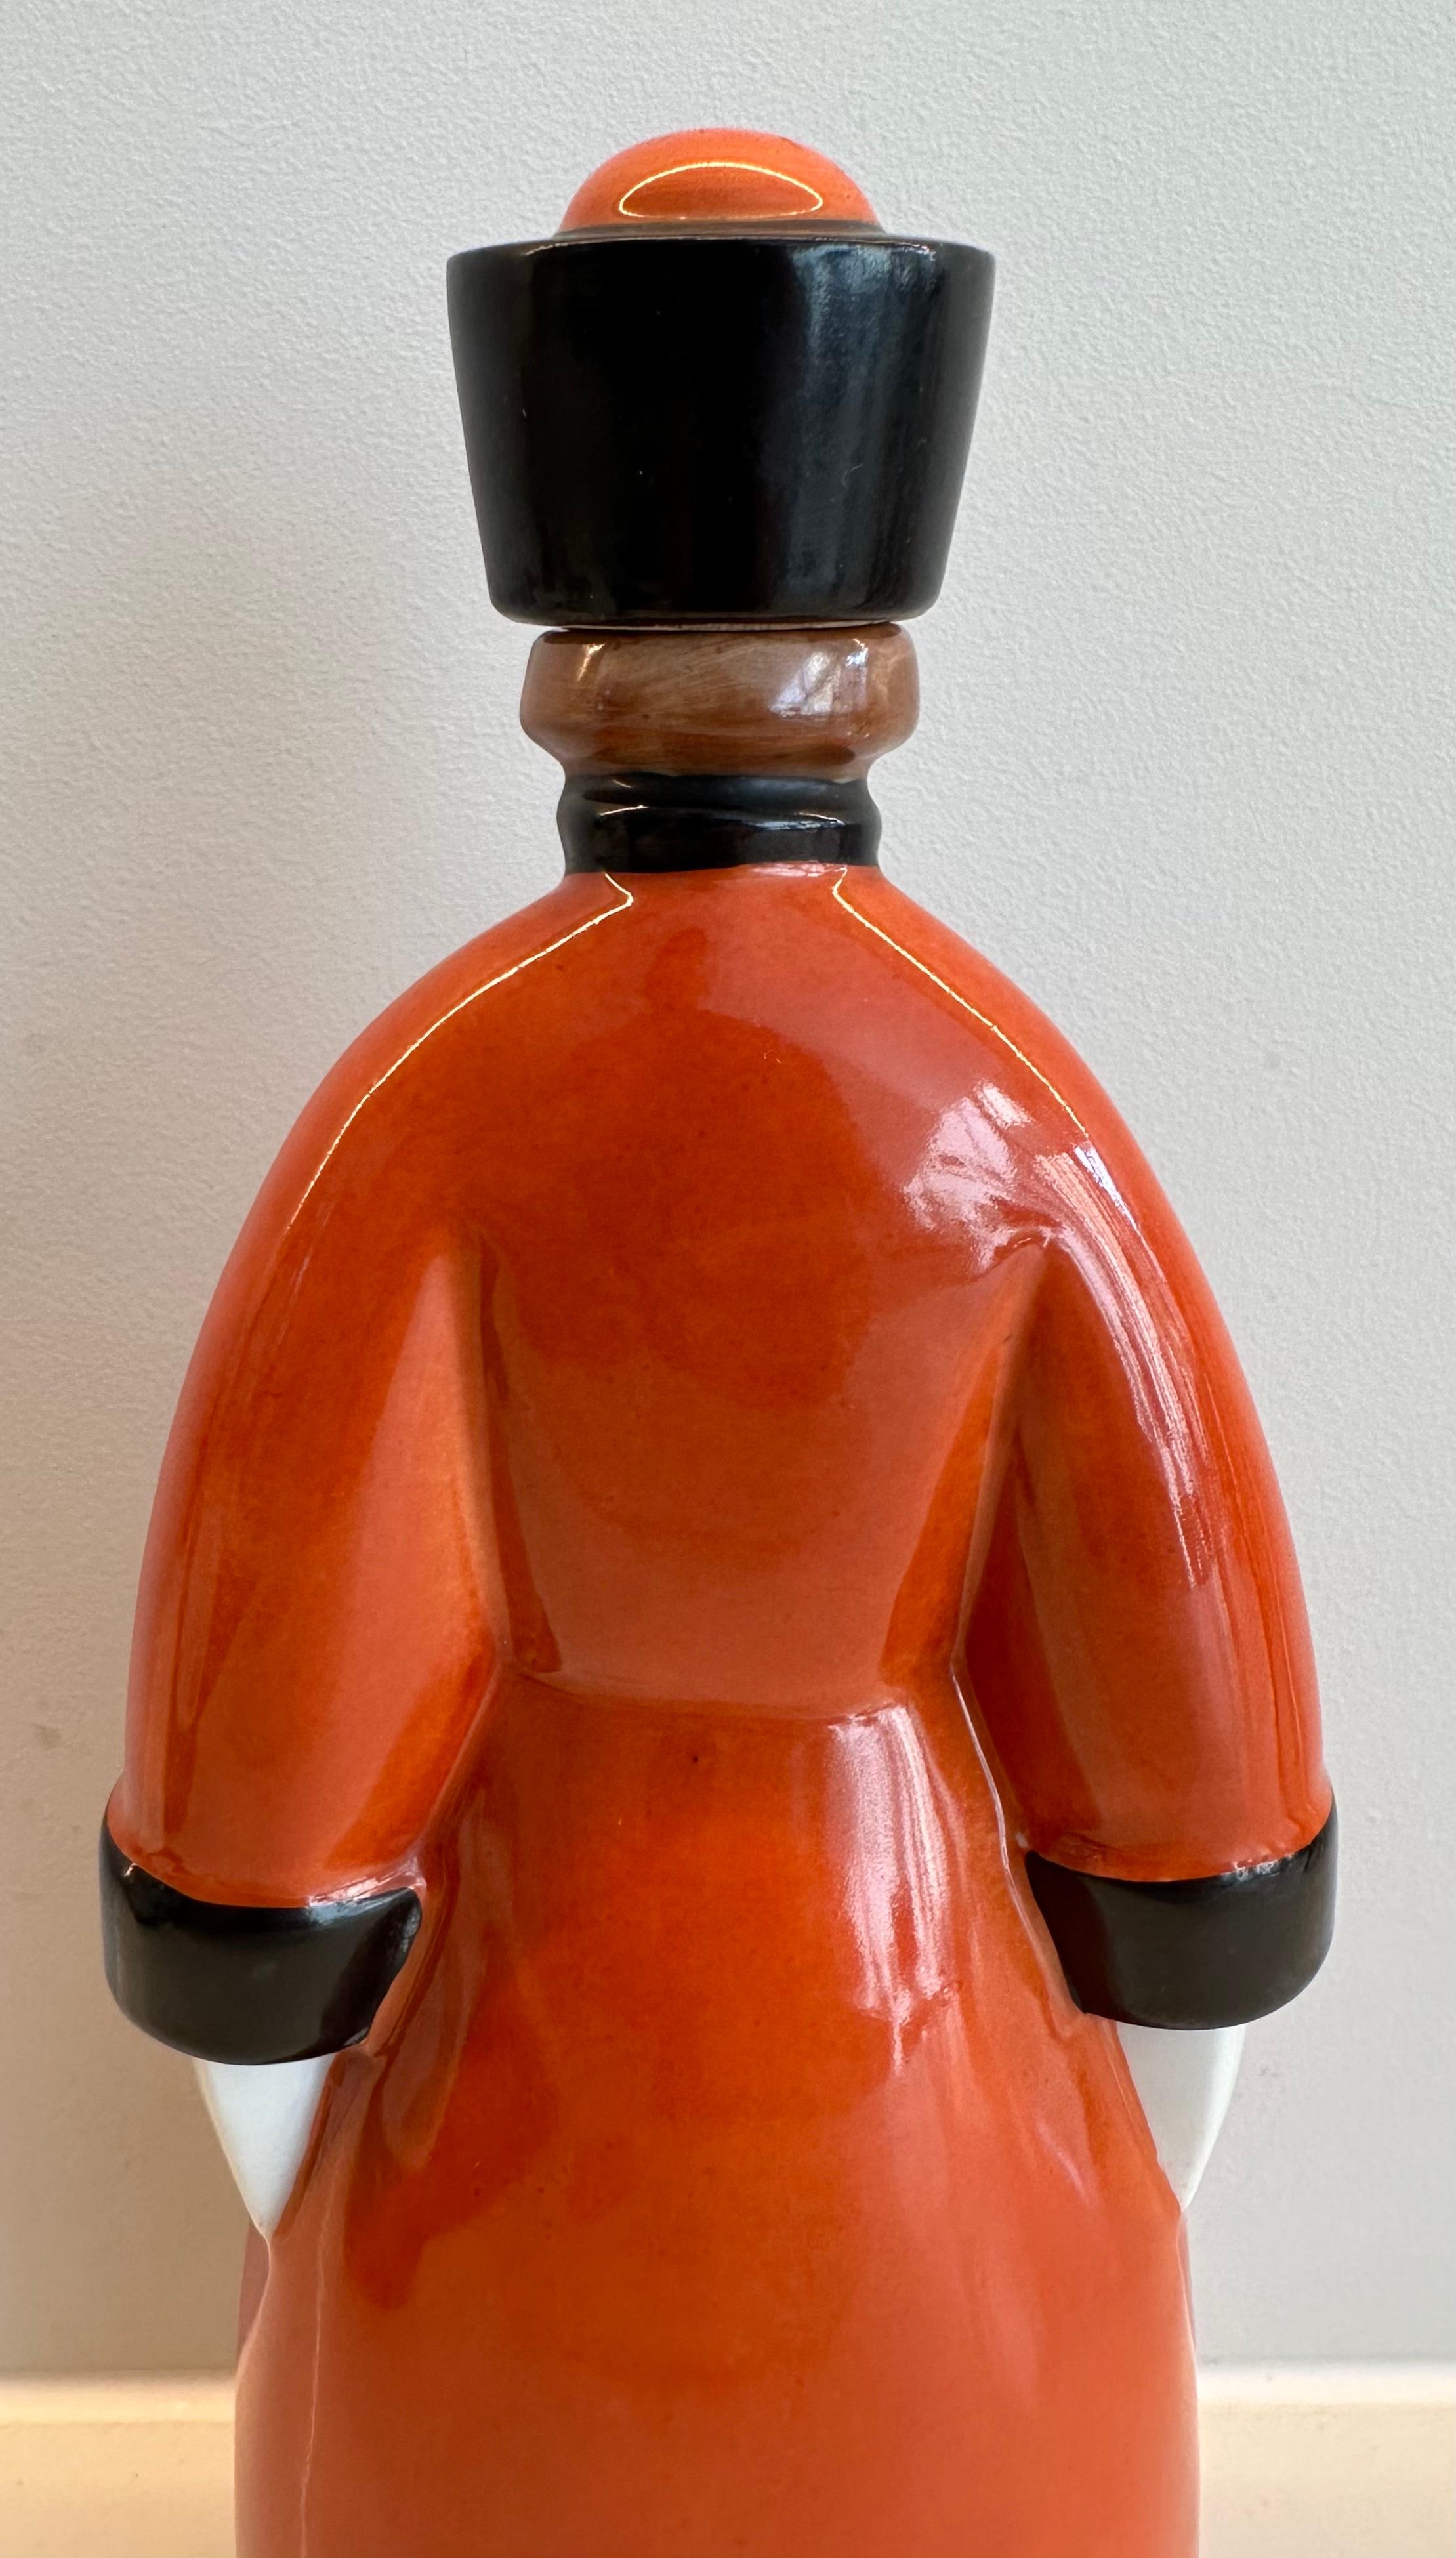 Art Deco 1930s French “Curacao” Figural Russian Soldier Flask by Robj Paris For Sale 2